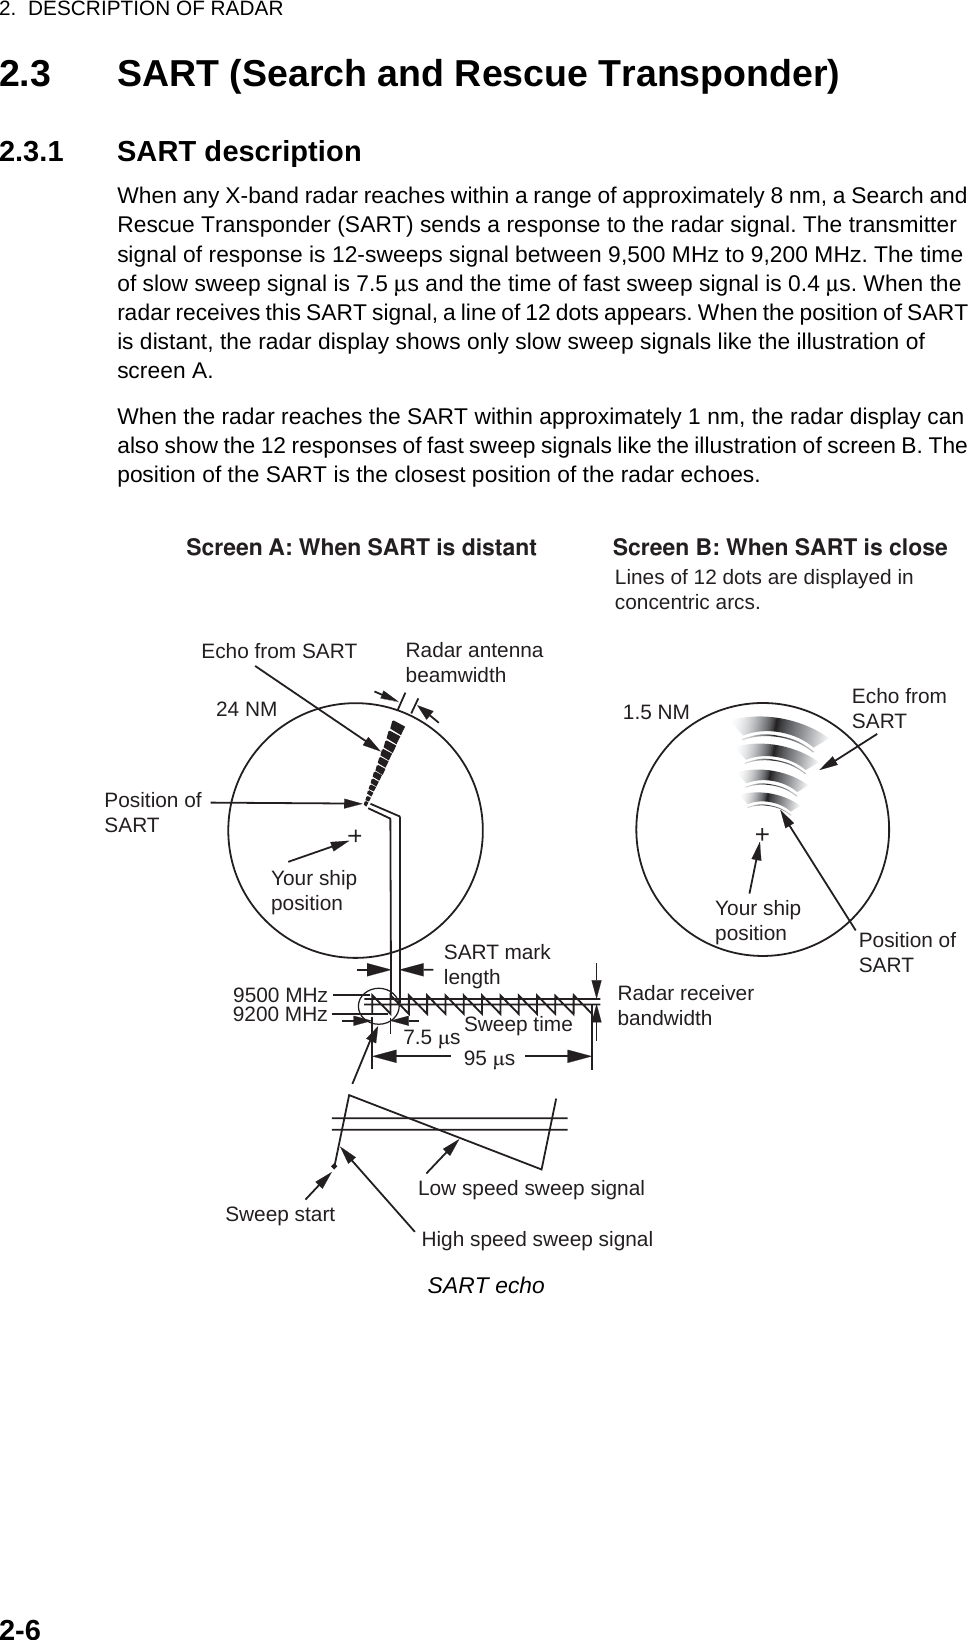 2.  DESCRIPTION OF RADAR2-62.3 SART (Search and Rescue Transponder)2.3.1 SART descriptionWhen any X-band radar reaches within a range of approximately 8 nm, a Search and Rescue Transponder (SART) sends a response to the radar signal. The transmitter signal of response is 12-sweeps signal between 9,500 MHz to 9,200 MHz. The time of slow sweep signal is 7.5 μs and the time of fast sweep signal is 0.4 μs. When the radar receives this SART signal, a line of 12 dots appears. When the position of SART is distant, the radar display shows only slow sweep signals like the illustration of screen A.When the radar reaches the SART within approximately 1 nm, the radar display can also show the 12 responses of fast sweep signals like the illustration of screen B. The position of the SART is the closest position of the radar echoes.SART echo9500 MHz9200 MHzRadar antennabeamwidthScreen A: When SART is distant Screen B: When SART is close Echo from SARTPosition ofSARTYour shipposition Your shippositionSART marklength Radar receiverbandwidthSweep time7.5 µs 95 µs Sweep start High speed sweep signalLow speed sweep signal24 NM 1.5 NMPosition ofSARTEcho fromSARTLines of 12 dots are displayed inconcentric arcs.